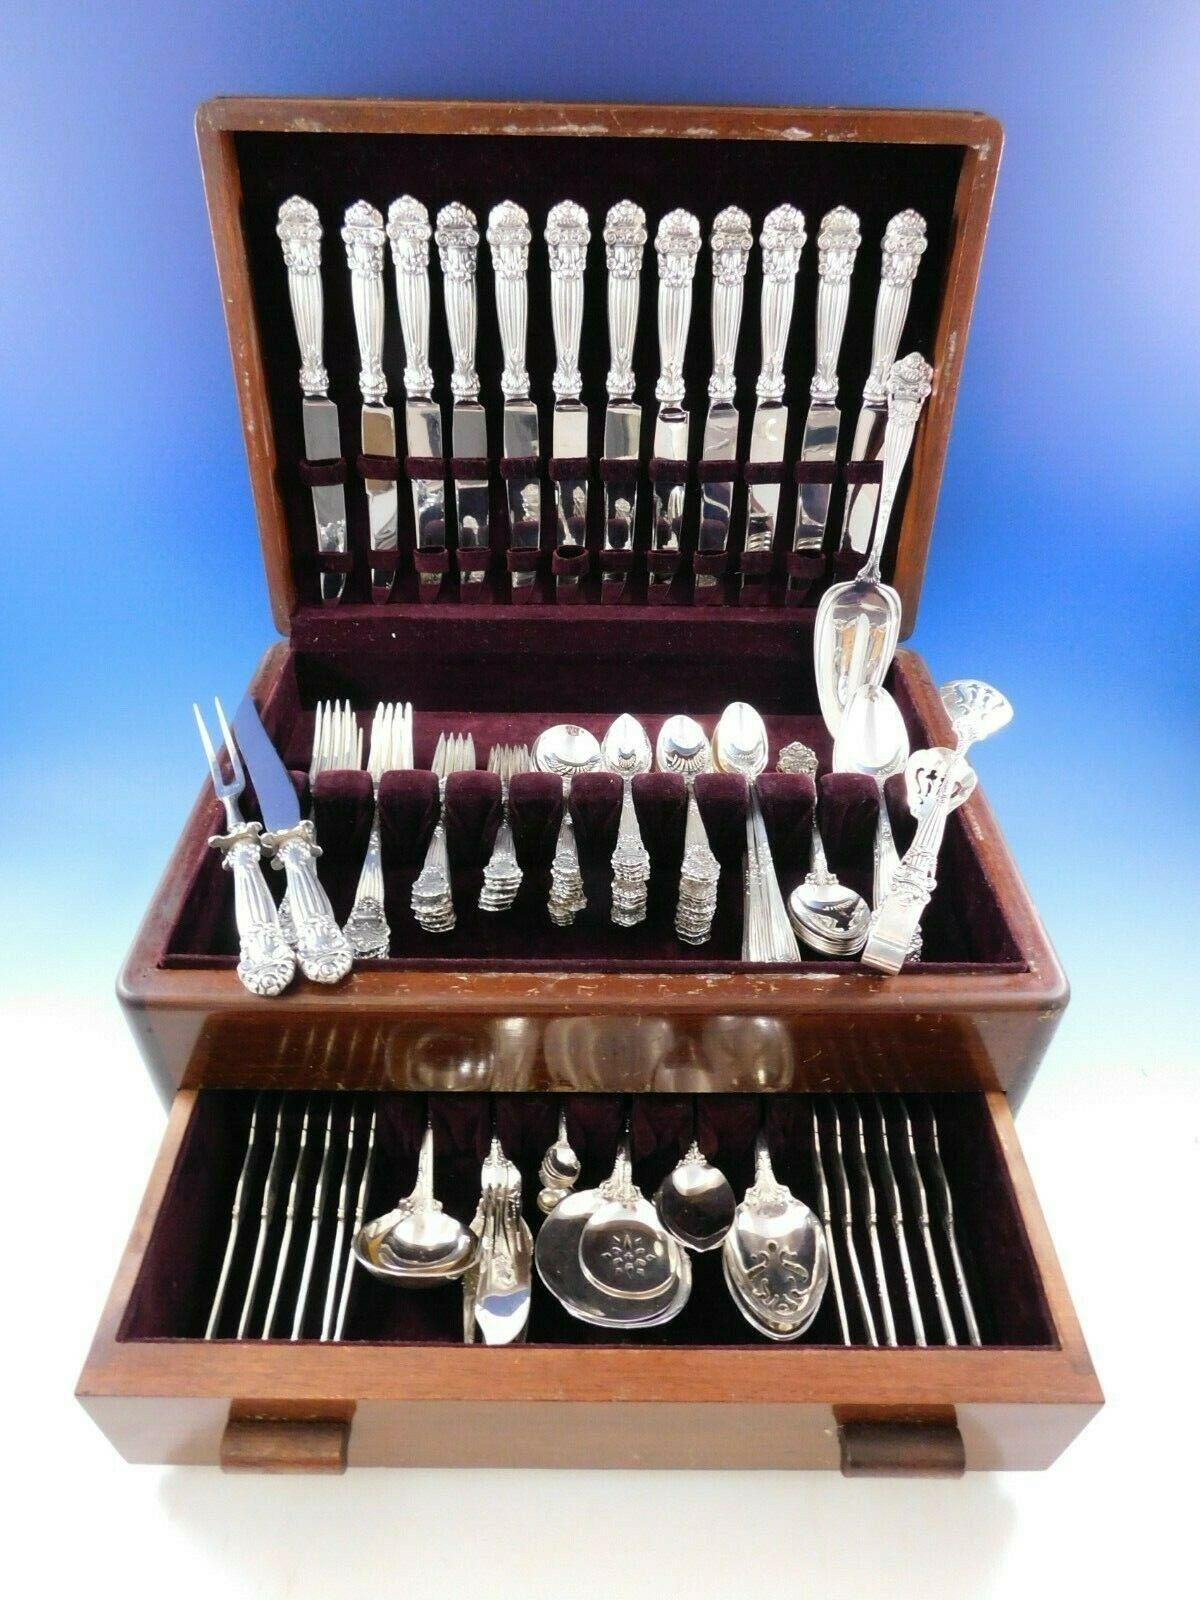 Dinner Size monumental Georgian by Towle sterling silver flatware set, 140 pieces. This set includes:

12 dinner size knives, with French stainless blades, 9 3/4